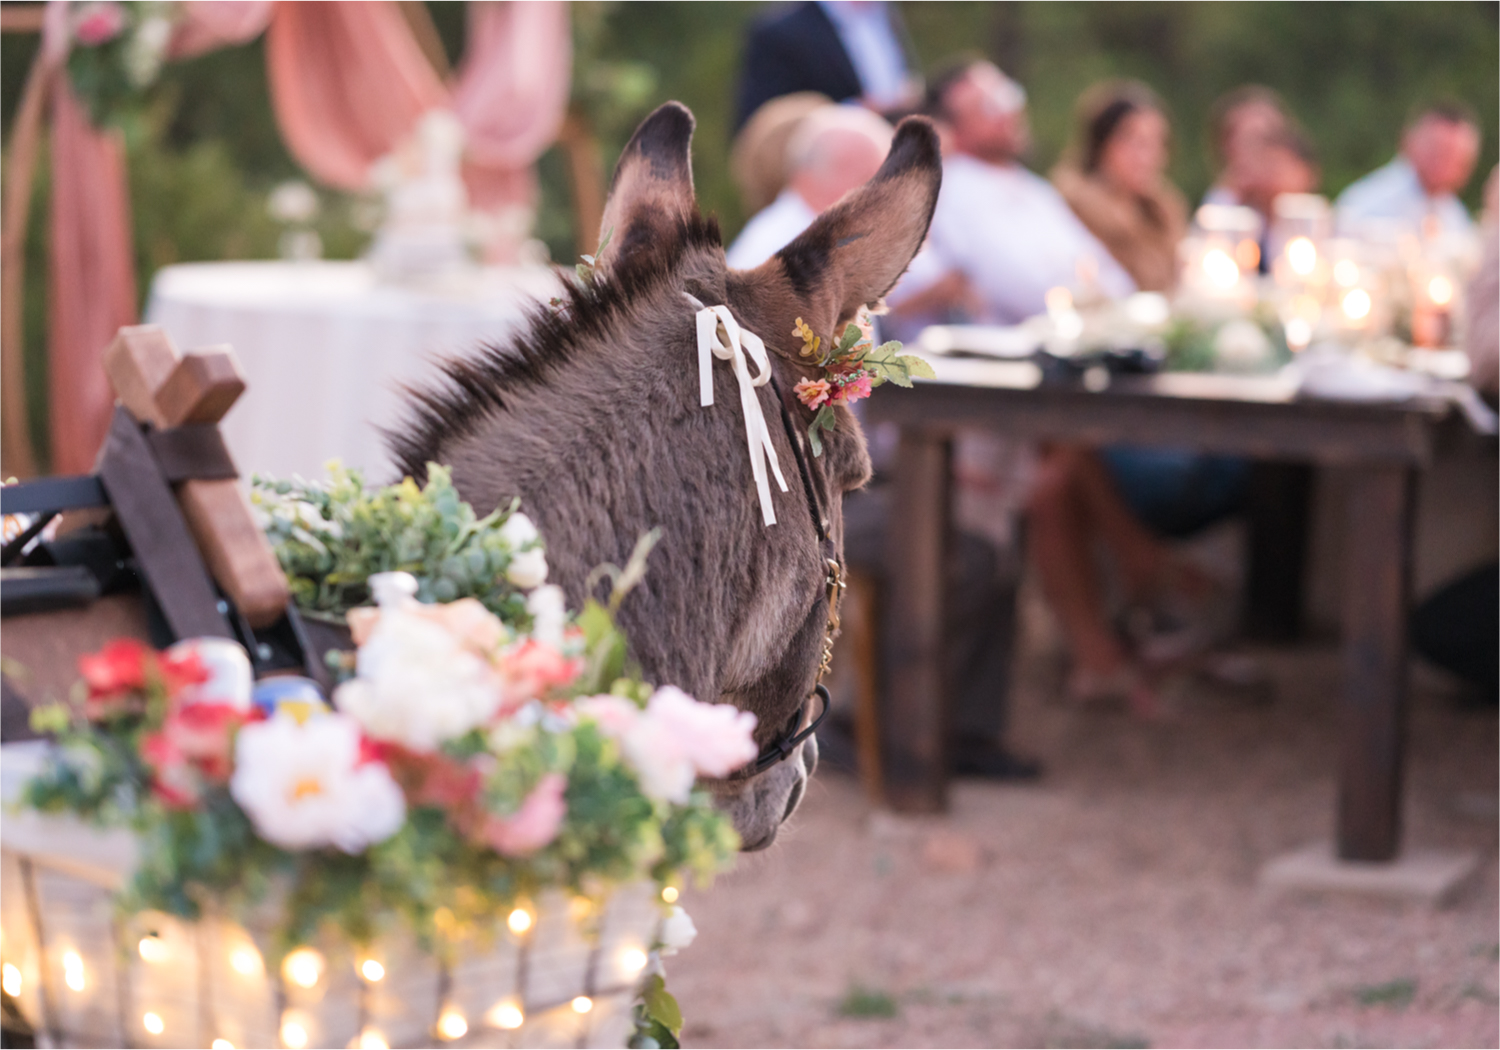 Autumn mountain wedding in Florence Colorado | Britni Girard Photography | Colorado Wedding Photo and Video Team | Mountainside Cabin for intimate wedding with rustic farm-tables and romantic details | Sunset Toast with food by The Picnic Basket | Rocky Mountain Beverage Burro